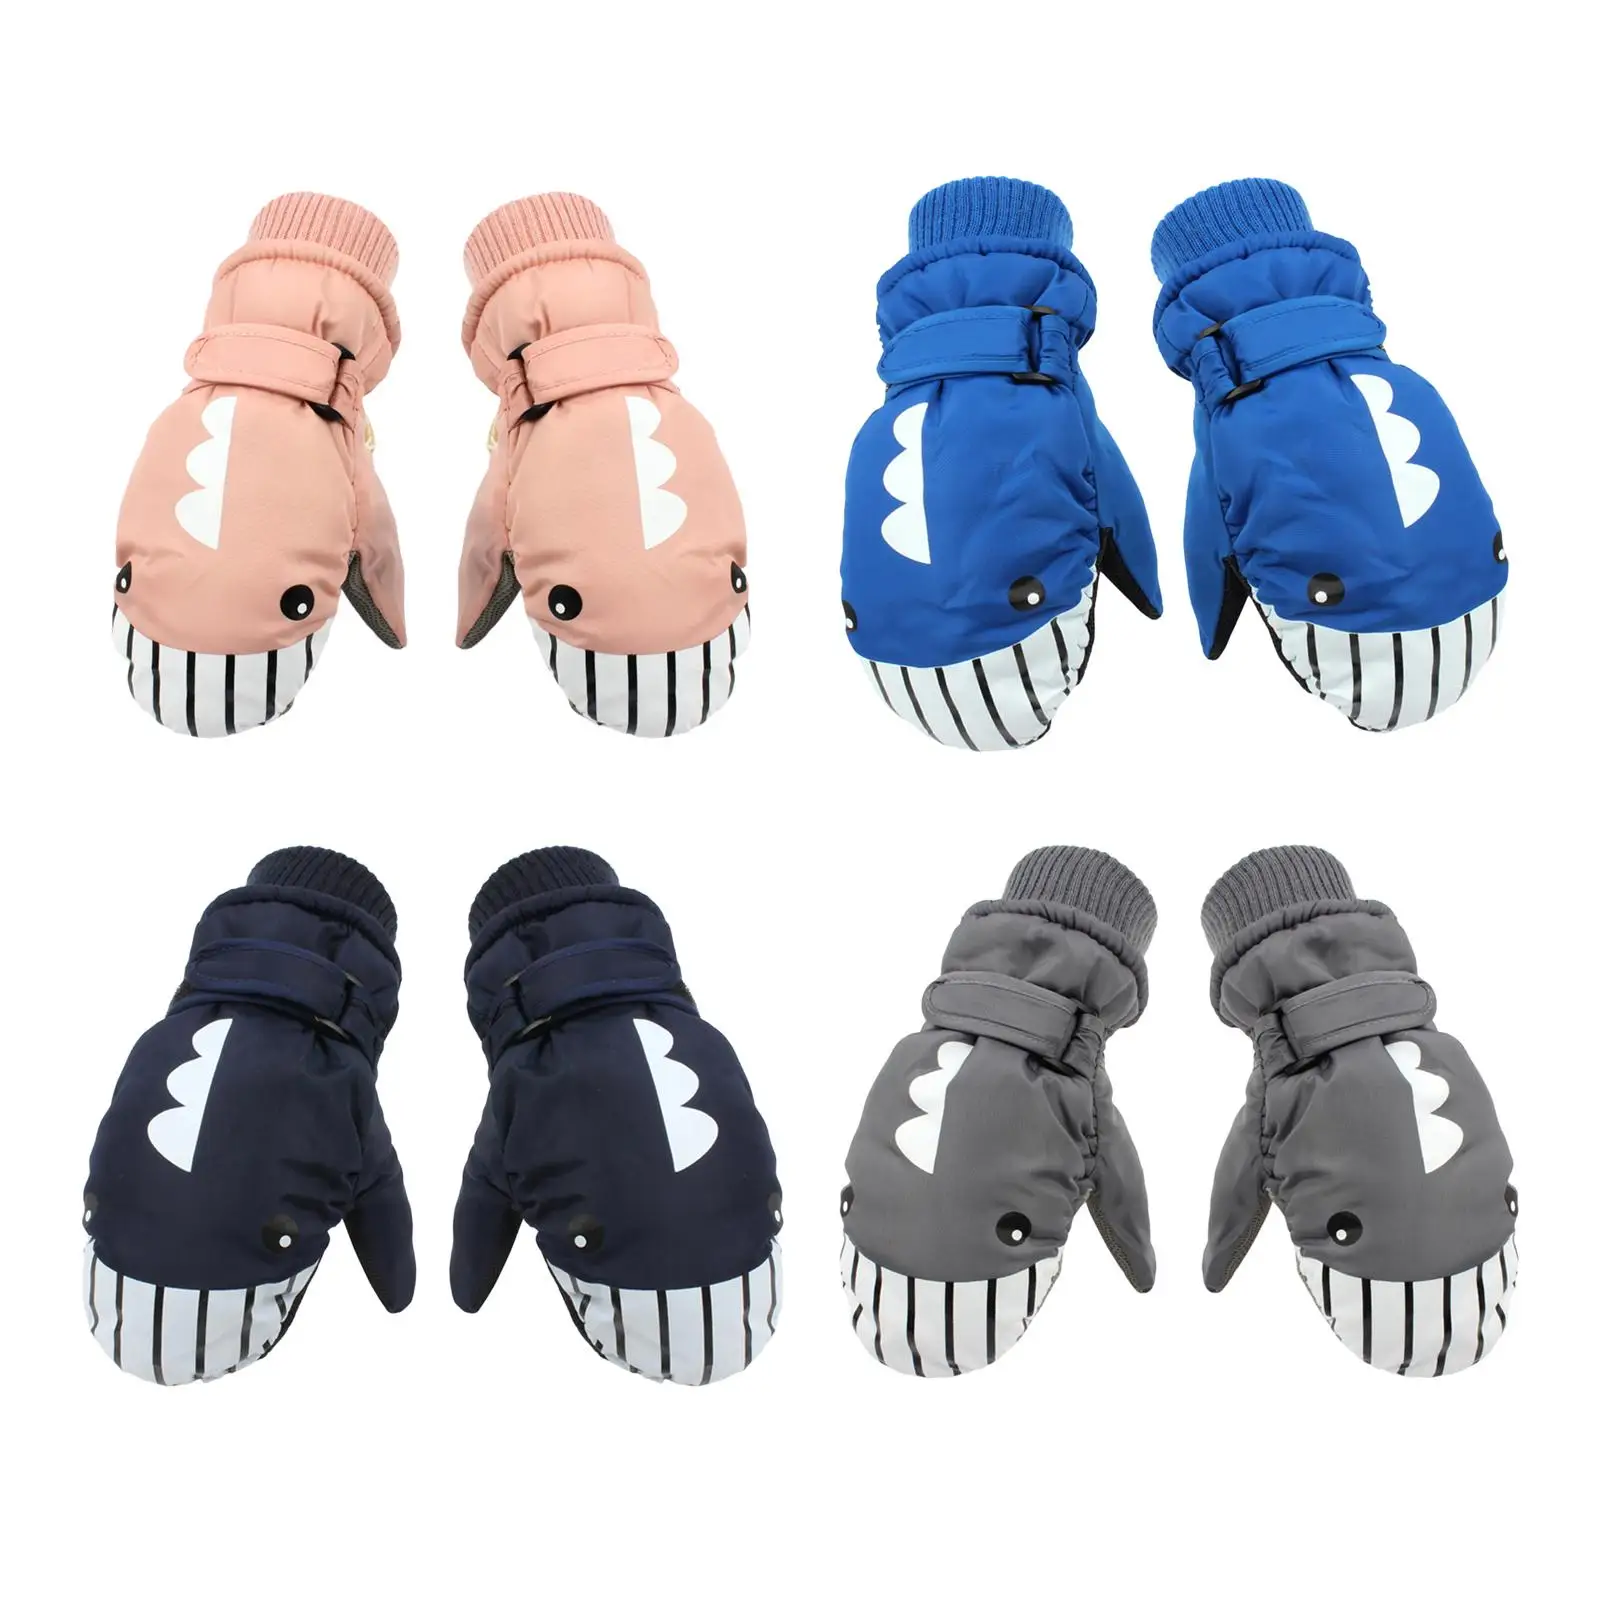 Kids Winter Gloves Lightweight Comfortable Waterproof Thickened Gloves Warm Mittens for Outdoor Biking Snow Cold Weather Riding